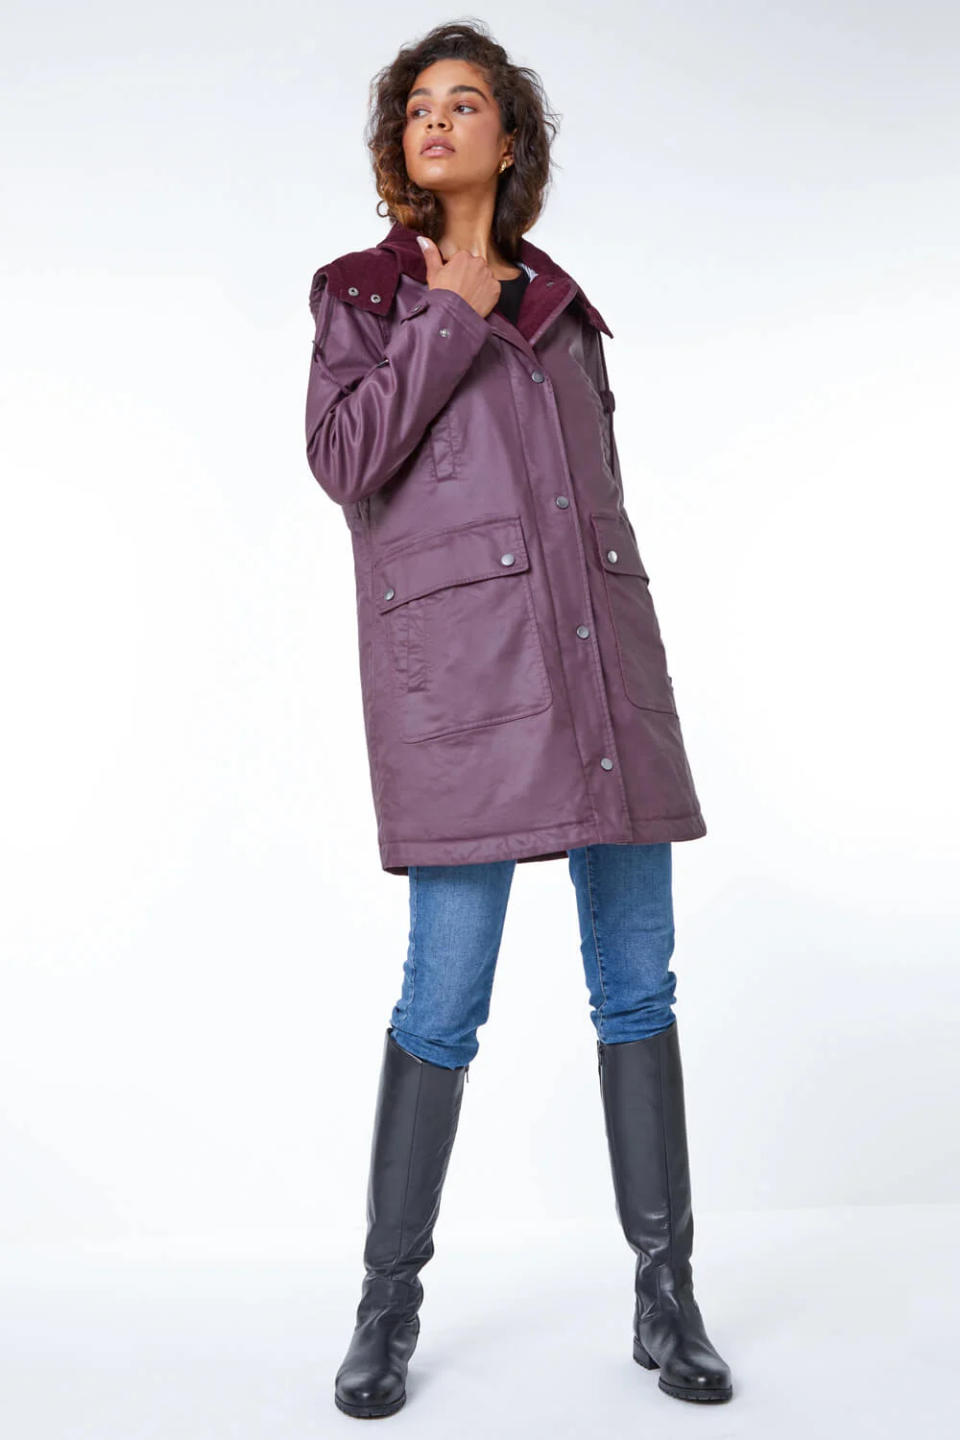 The coat comes in five classic colours including Khaki, Black, Bordeaux, Chocolate and Navy. (Roman)